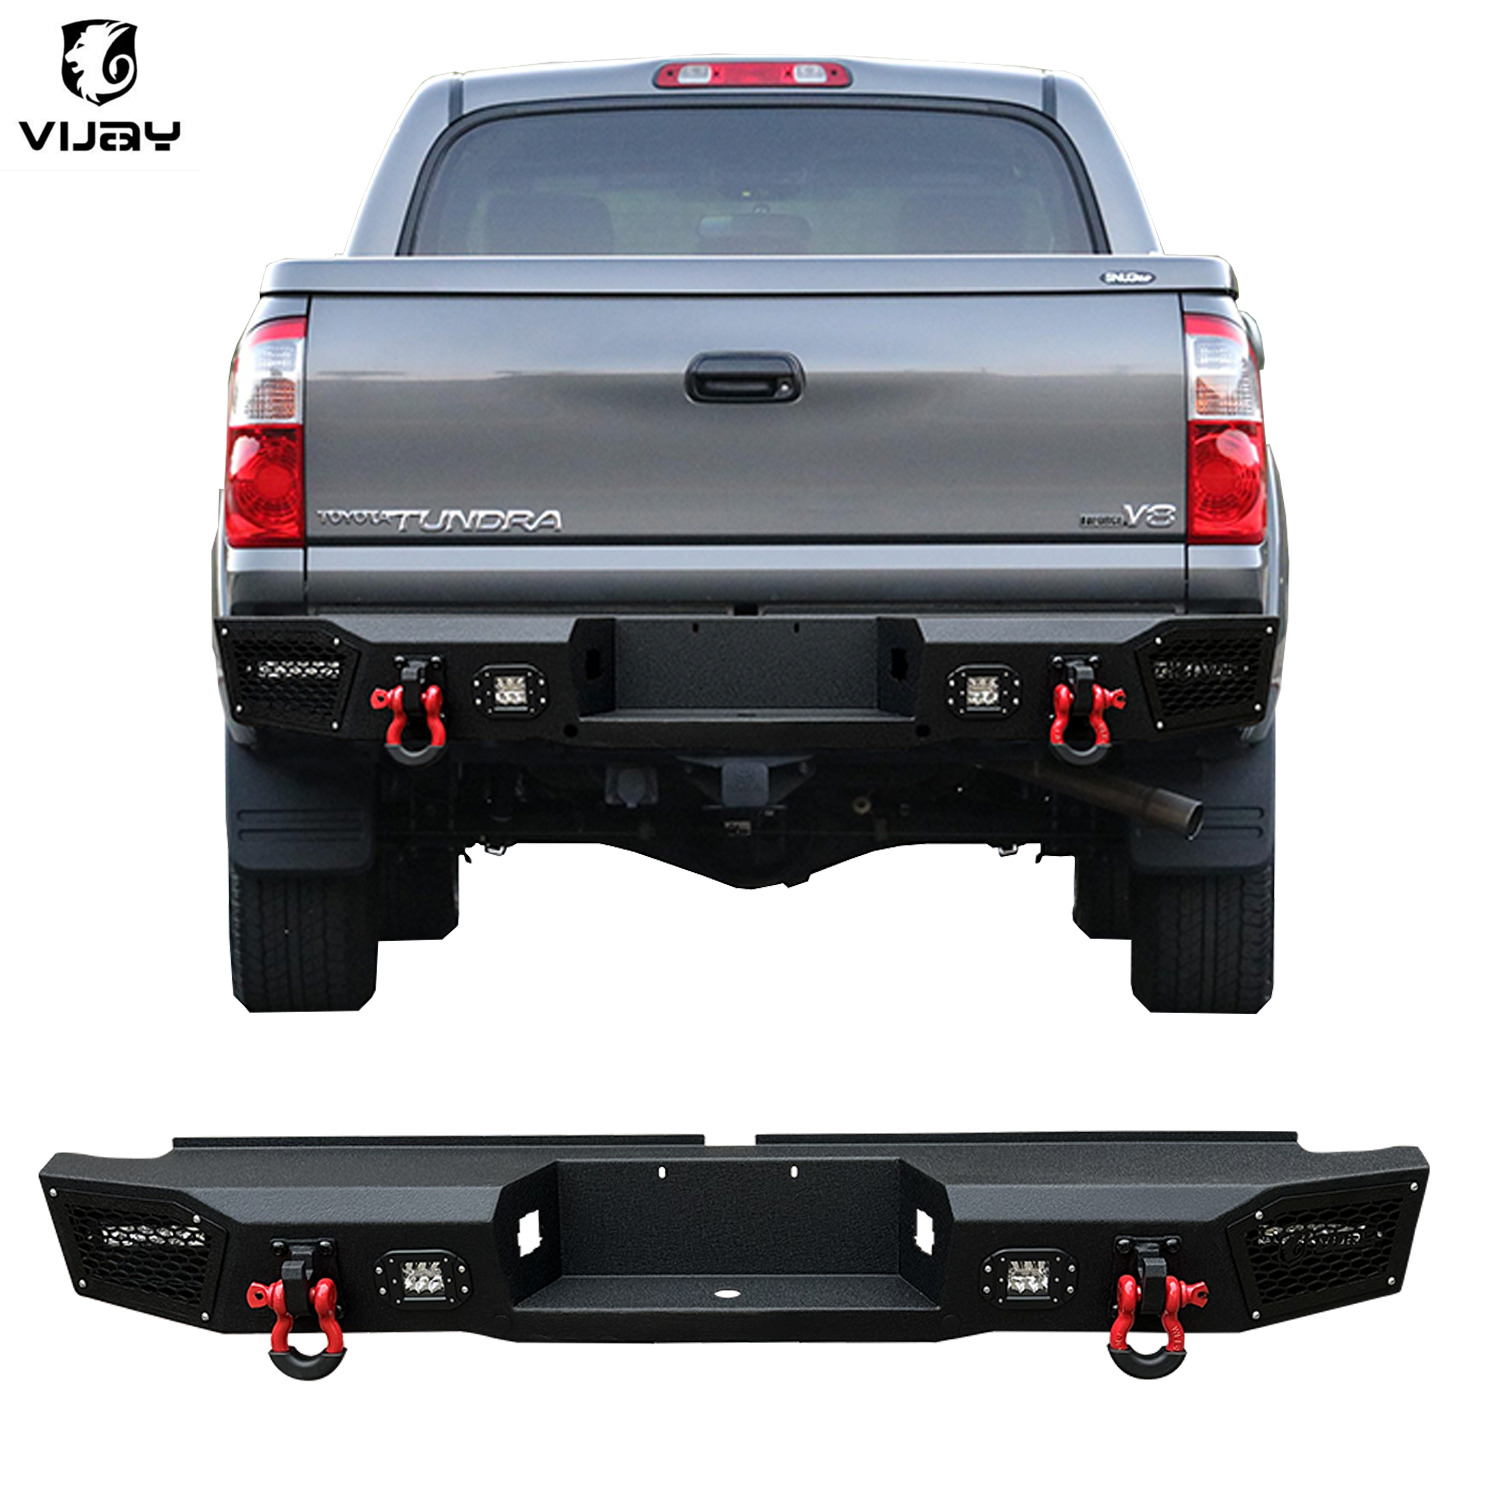 Vijay New Steel Rear Bumper With LED Lights&D-Rings For 2000-2006 Toyota Tundra 